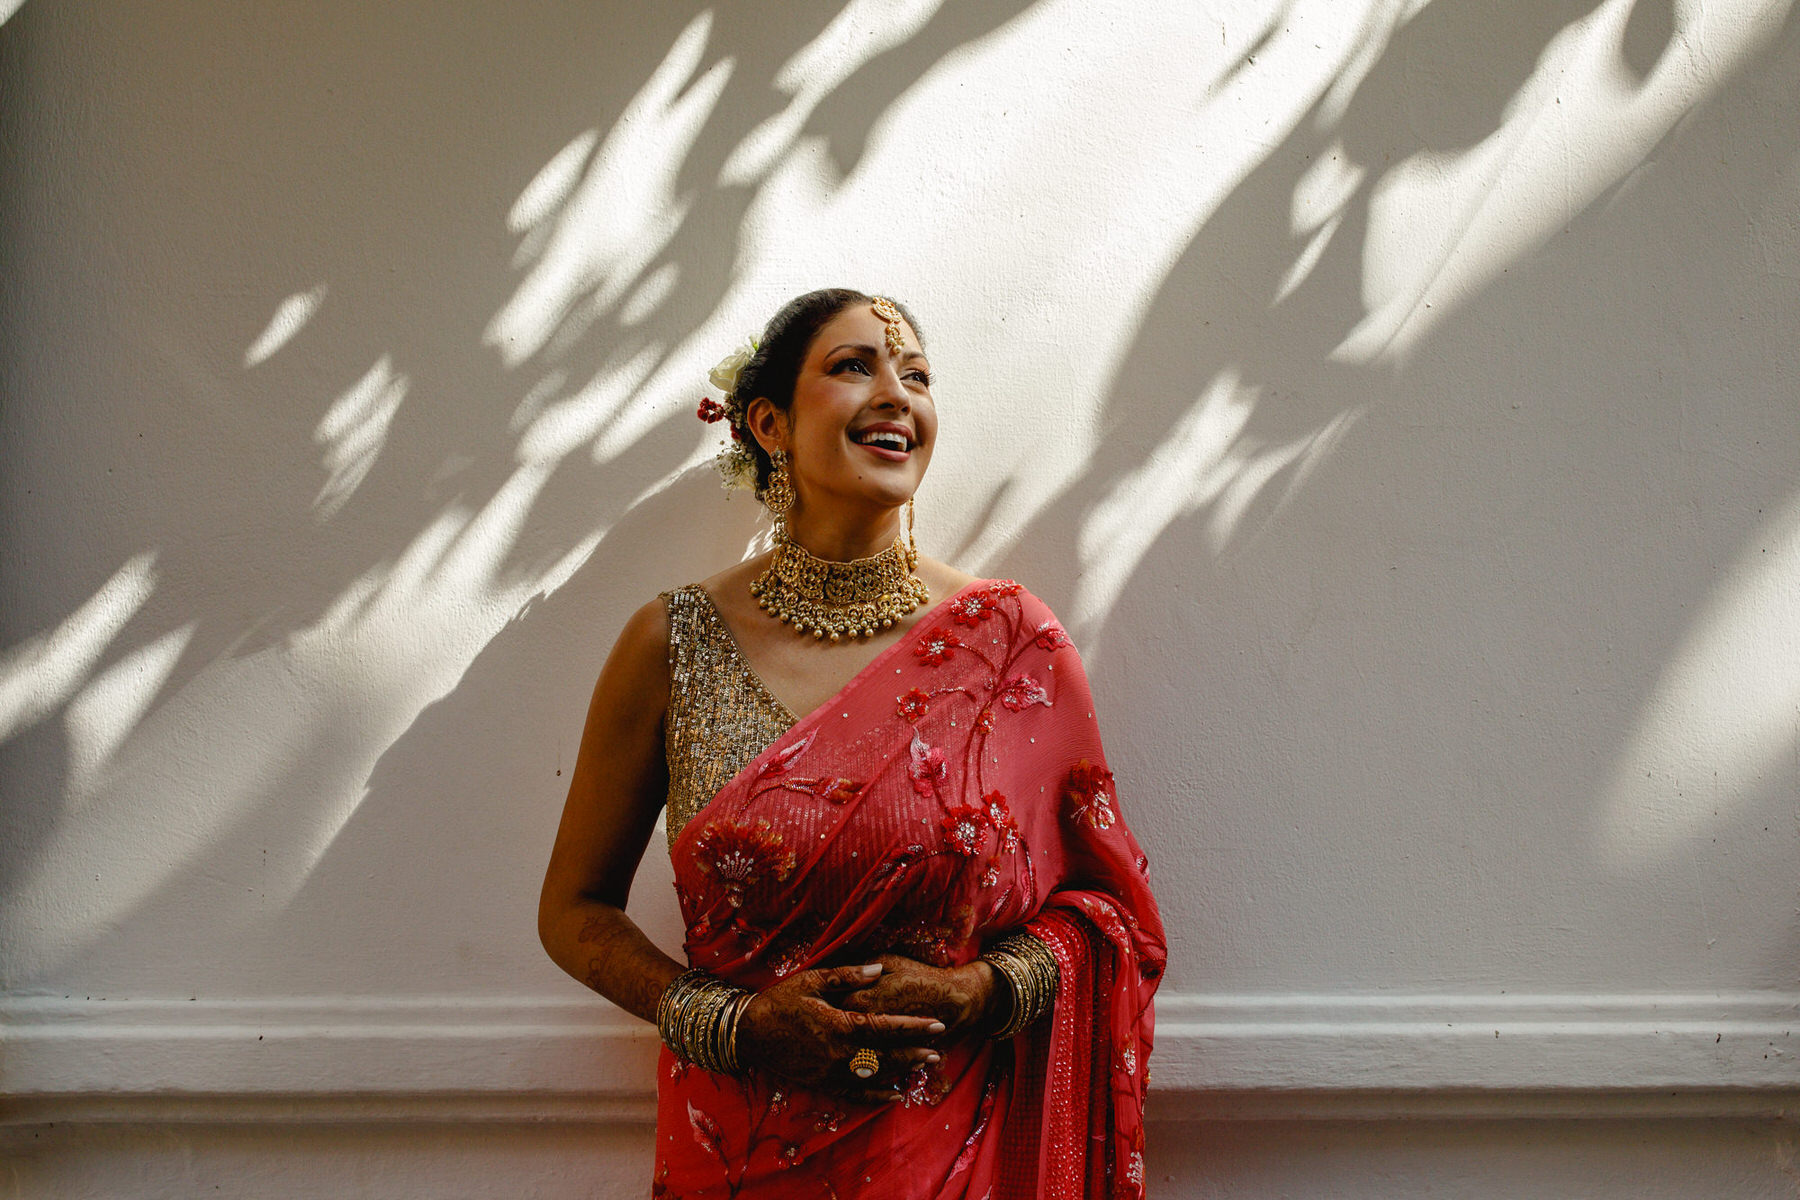 Elegant Indian bride in a bridal lehenga, complemented by intricate jewelry, during her wedding in Cartagena de Indias.